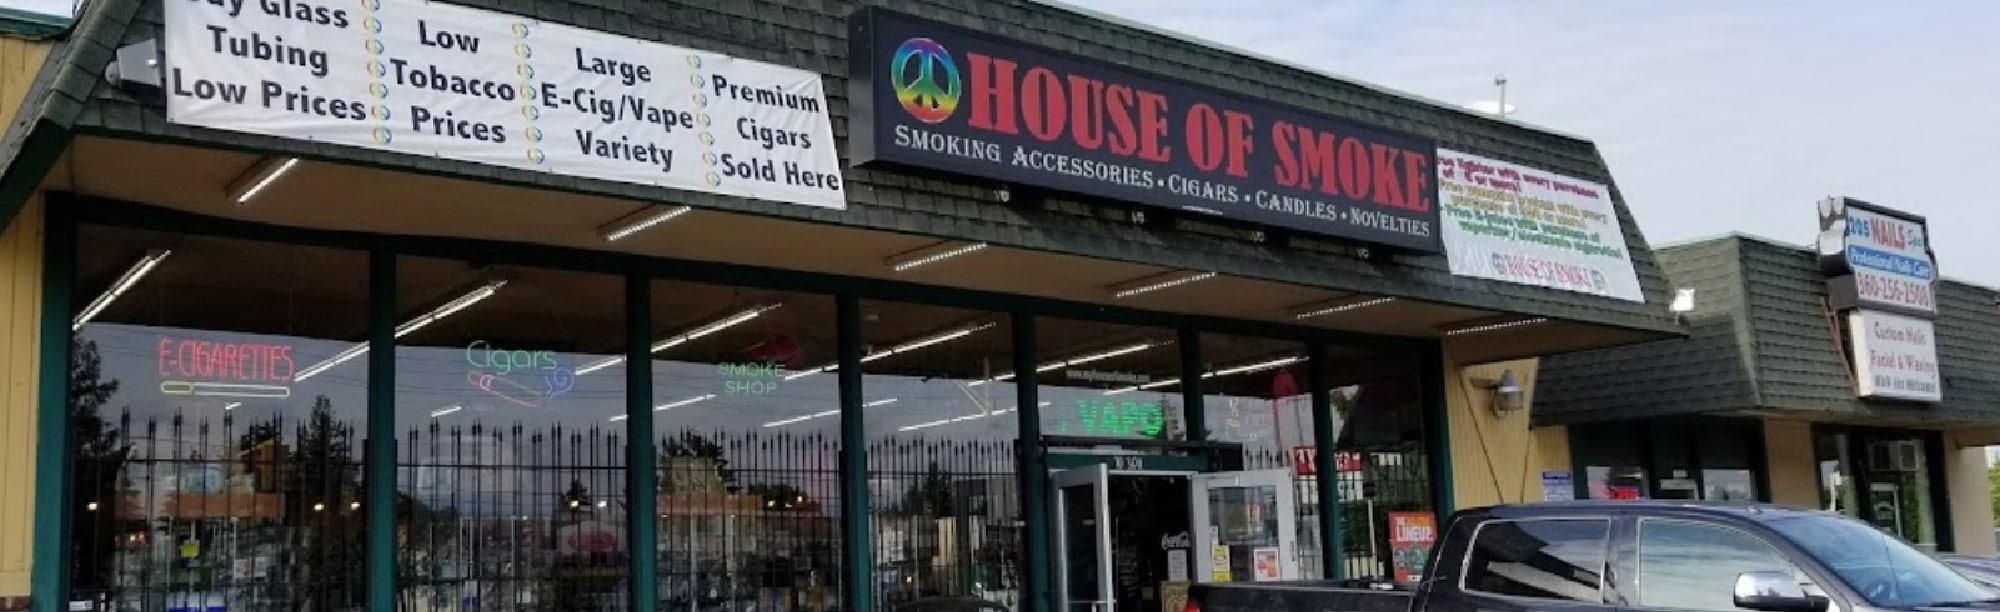 image of house of smoke where you can buy kratom in vancouver, washington